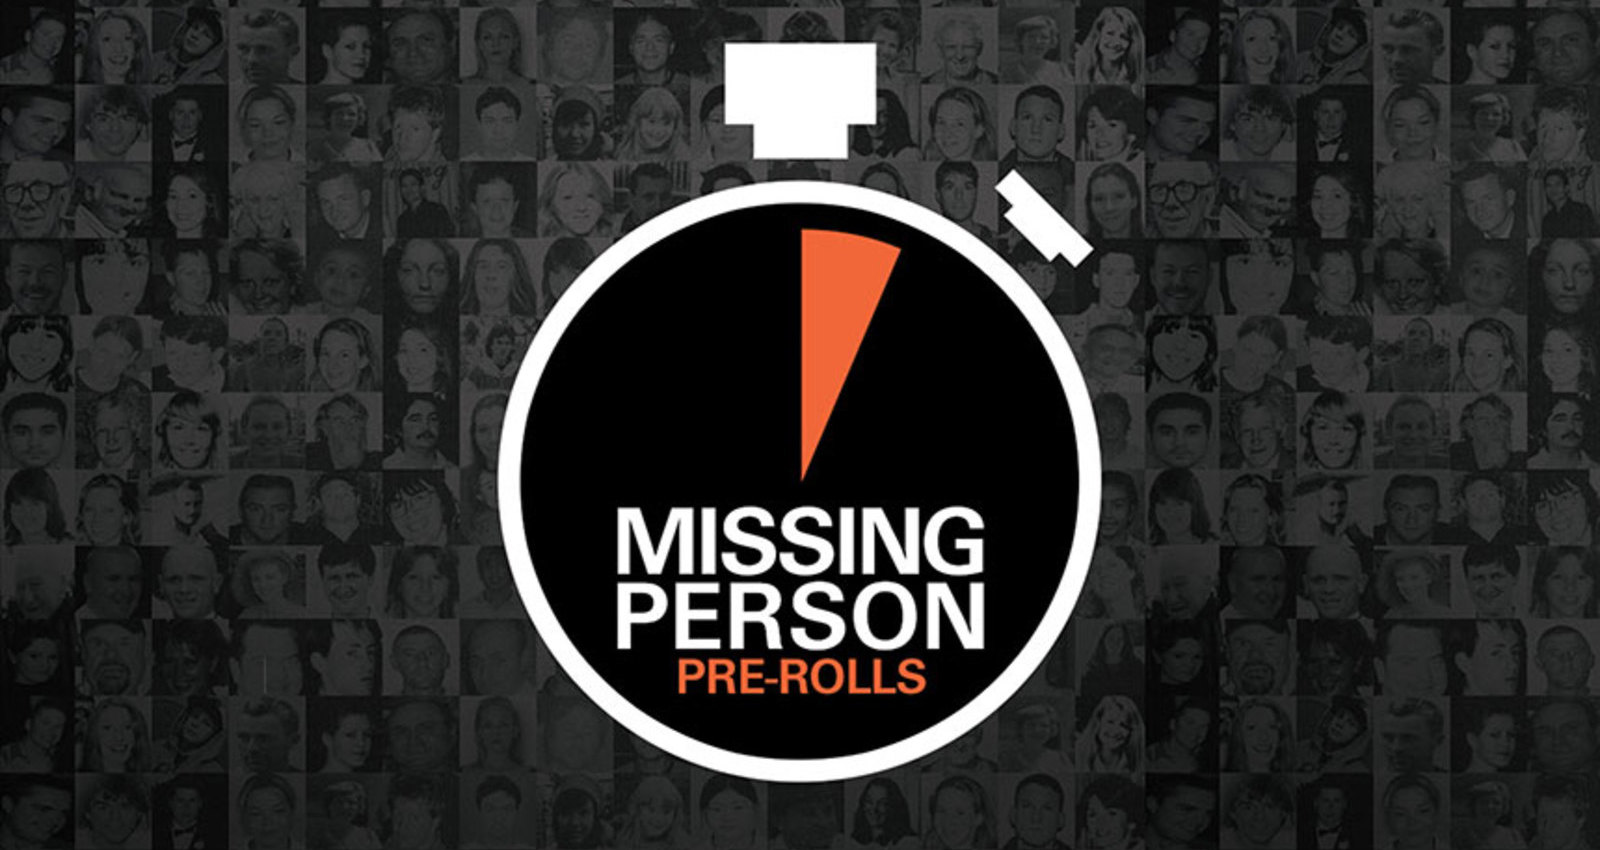 Missing Person Pre-Rolls